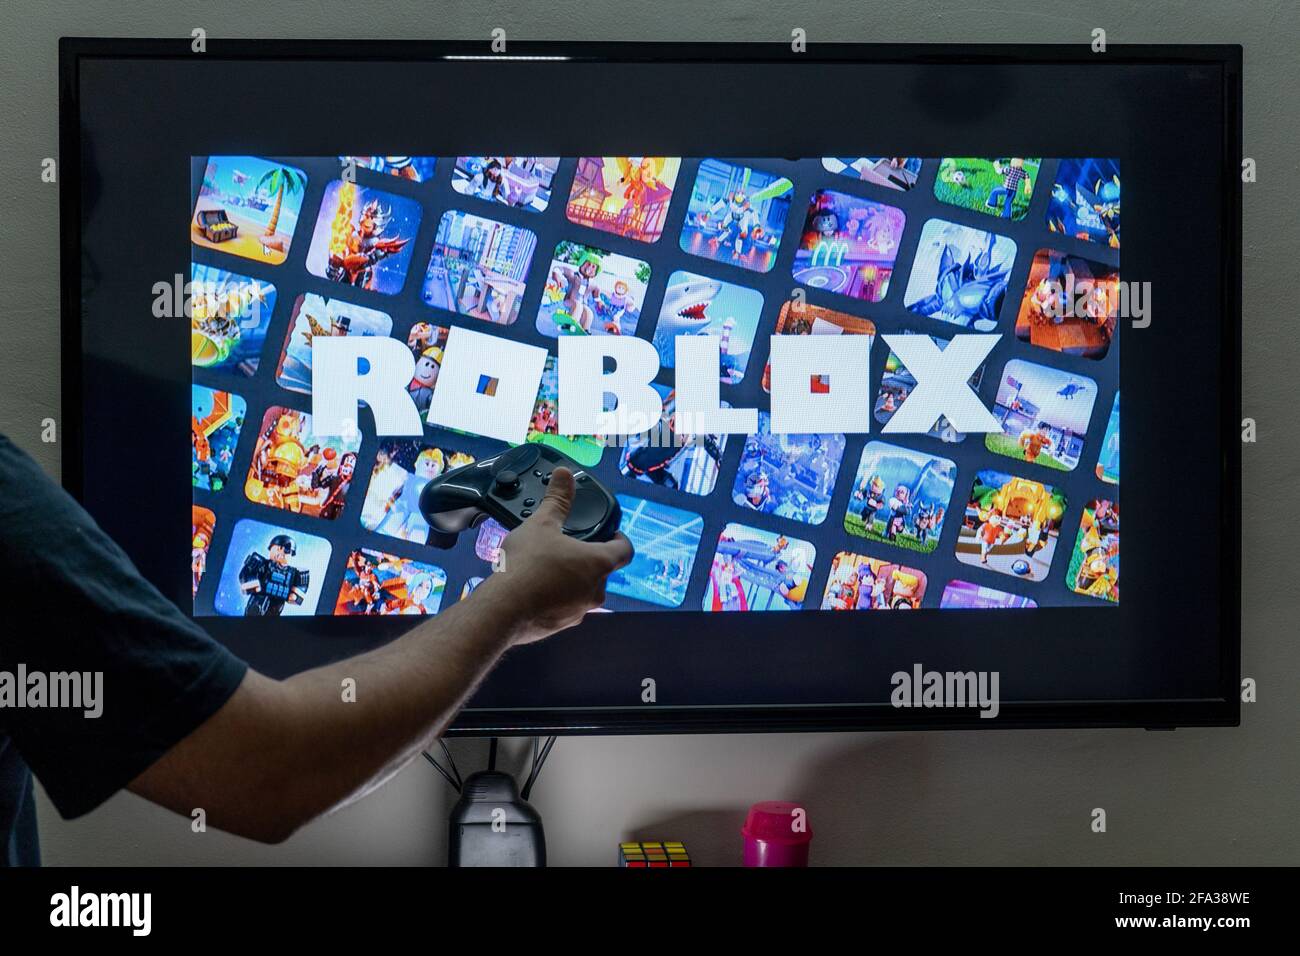 Roblox Game High Resolution Stock Photography And Images Alamy - www robux tv on your computer